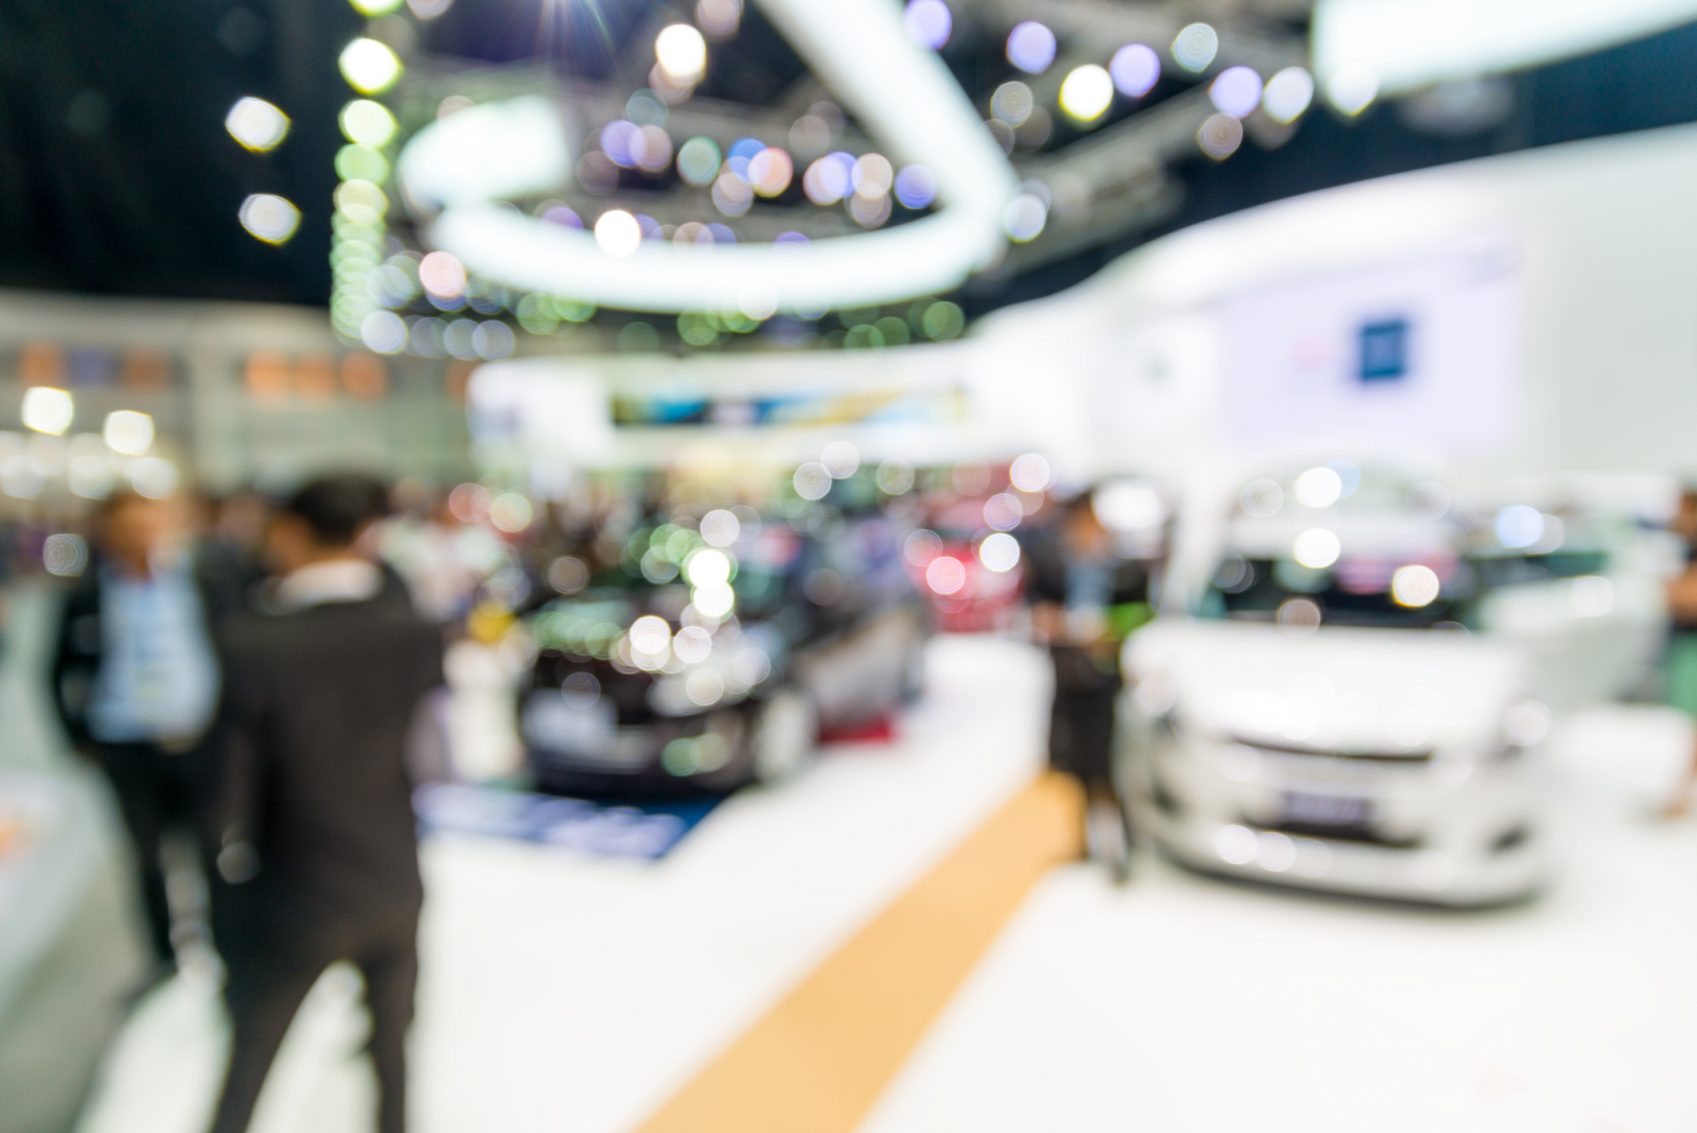 Automotive marketing takes a new stage at CES